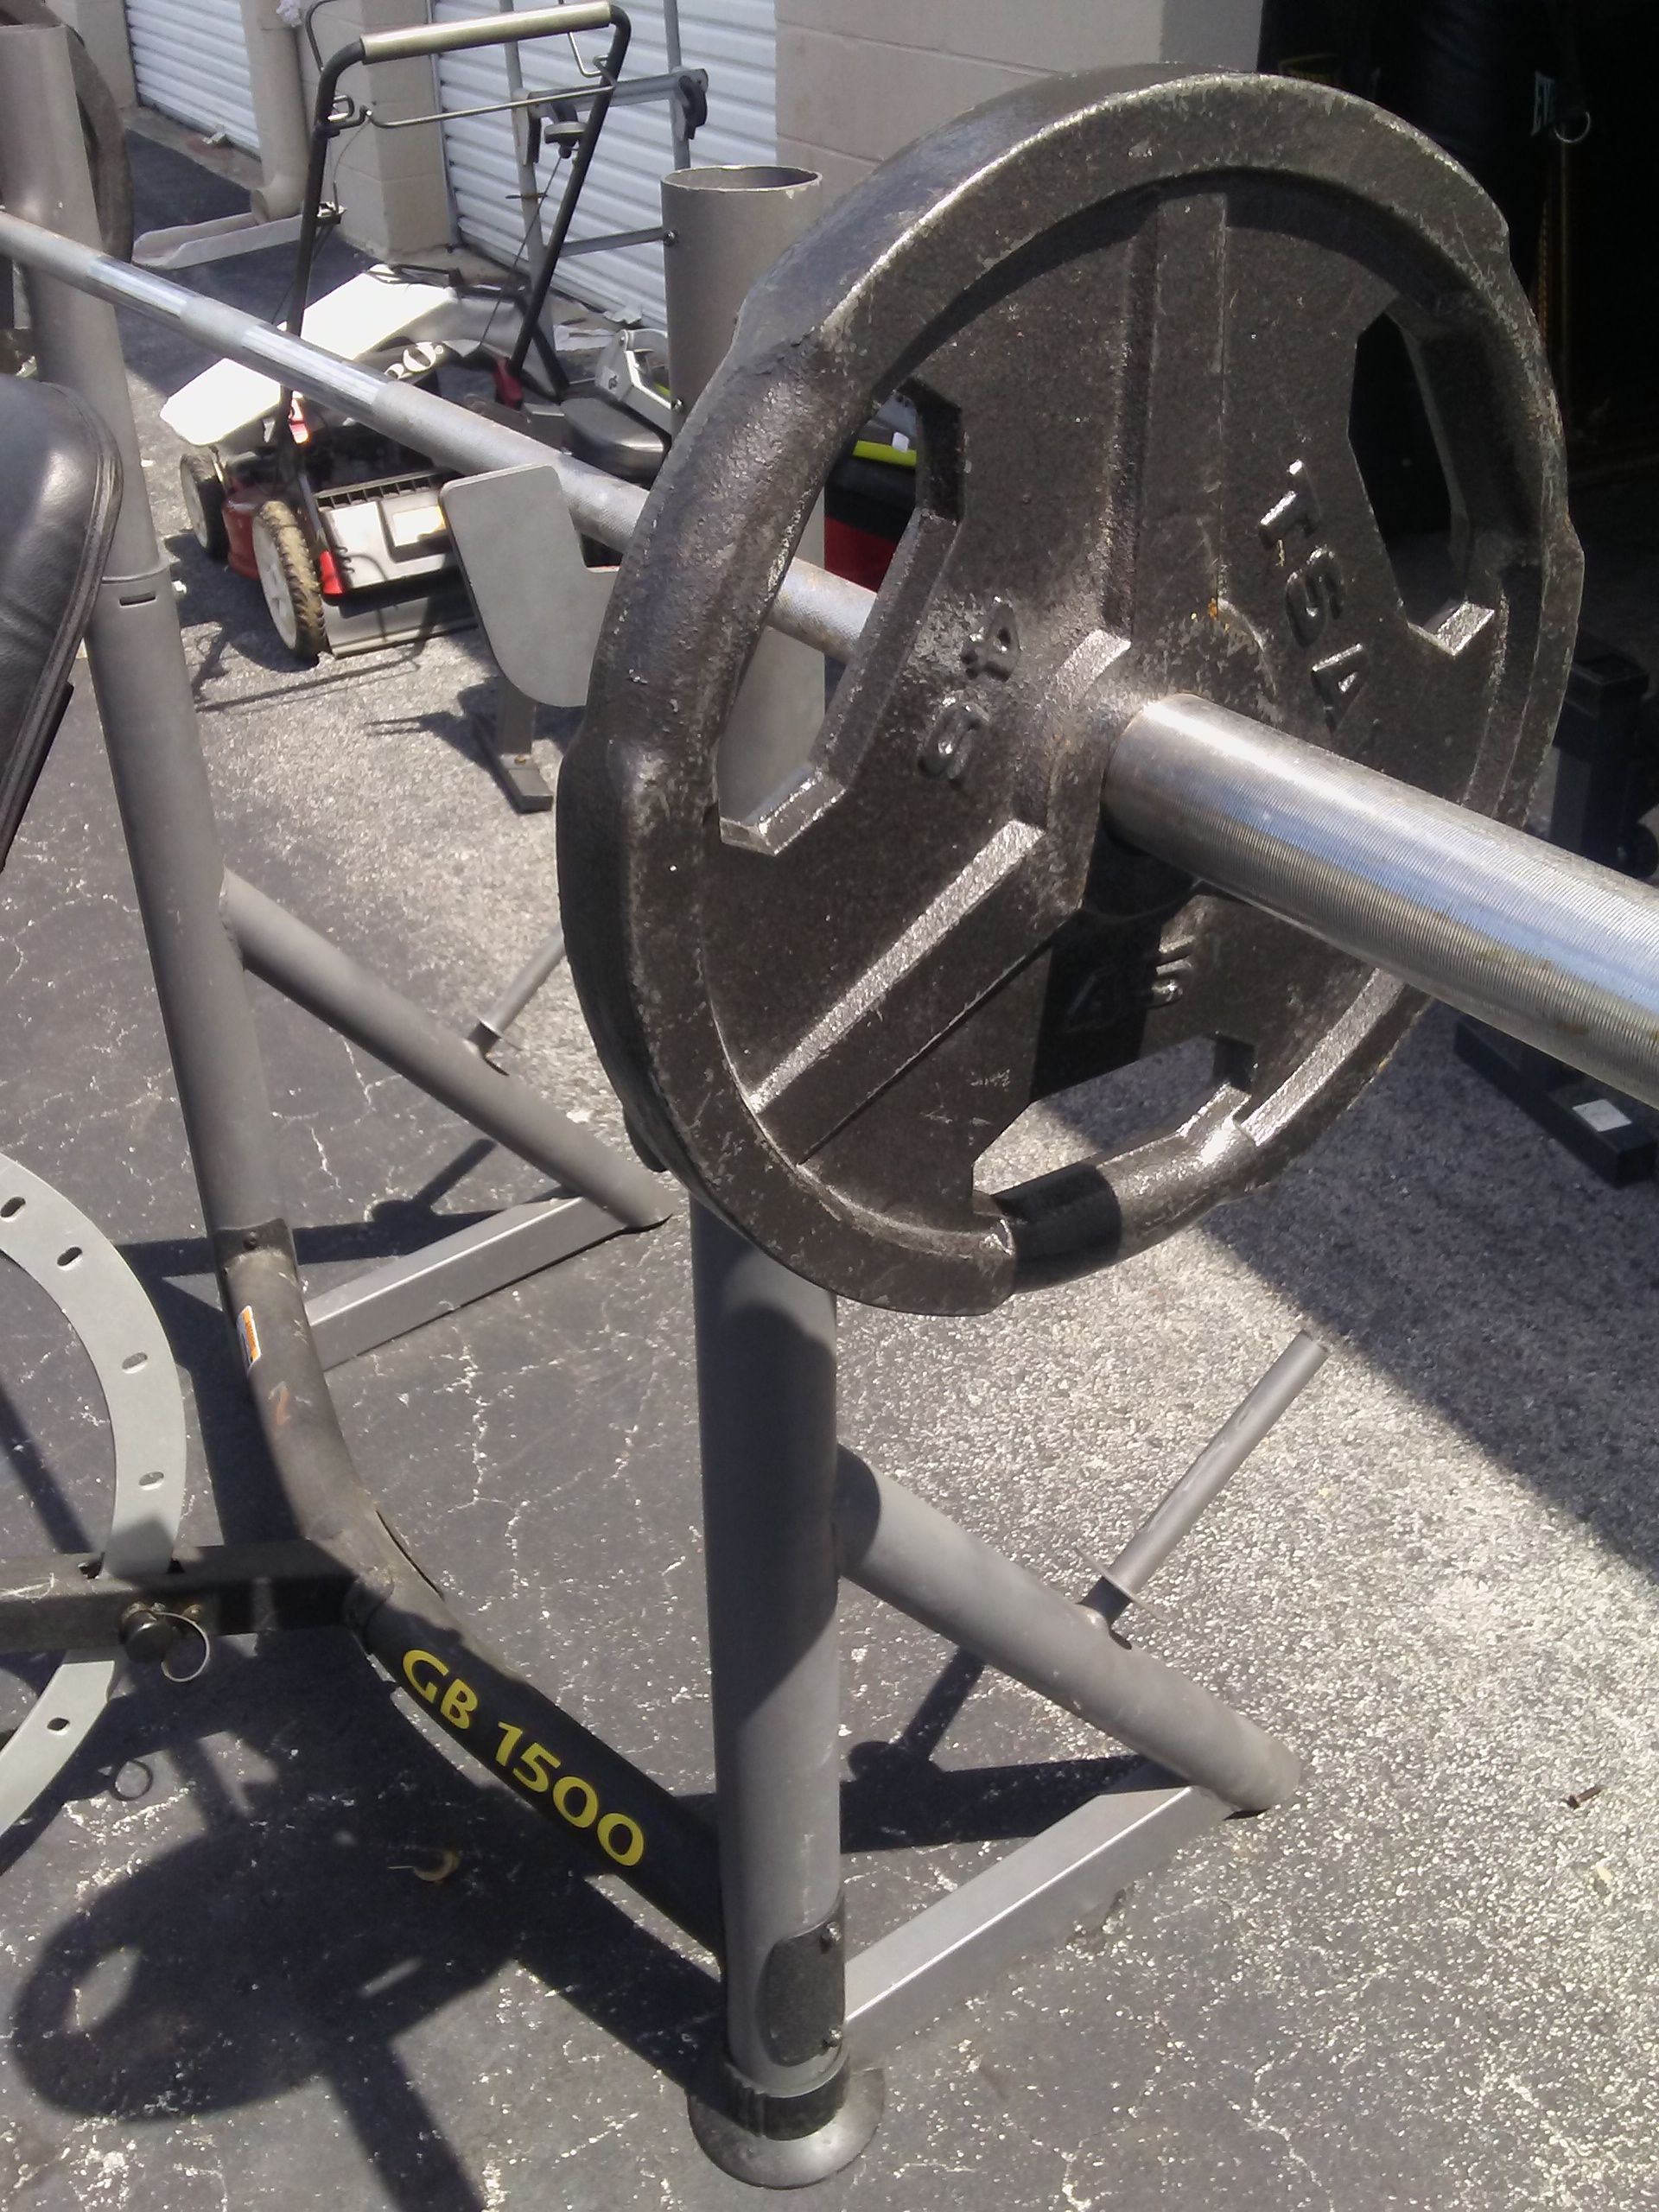 Golds gym weight bench/weights